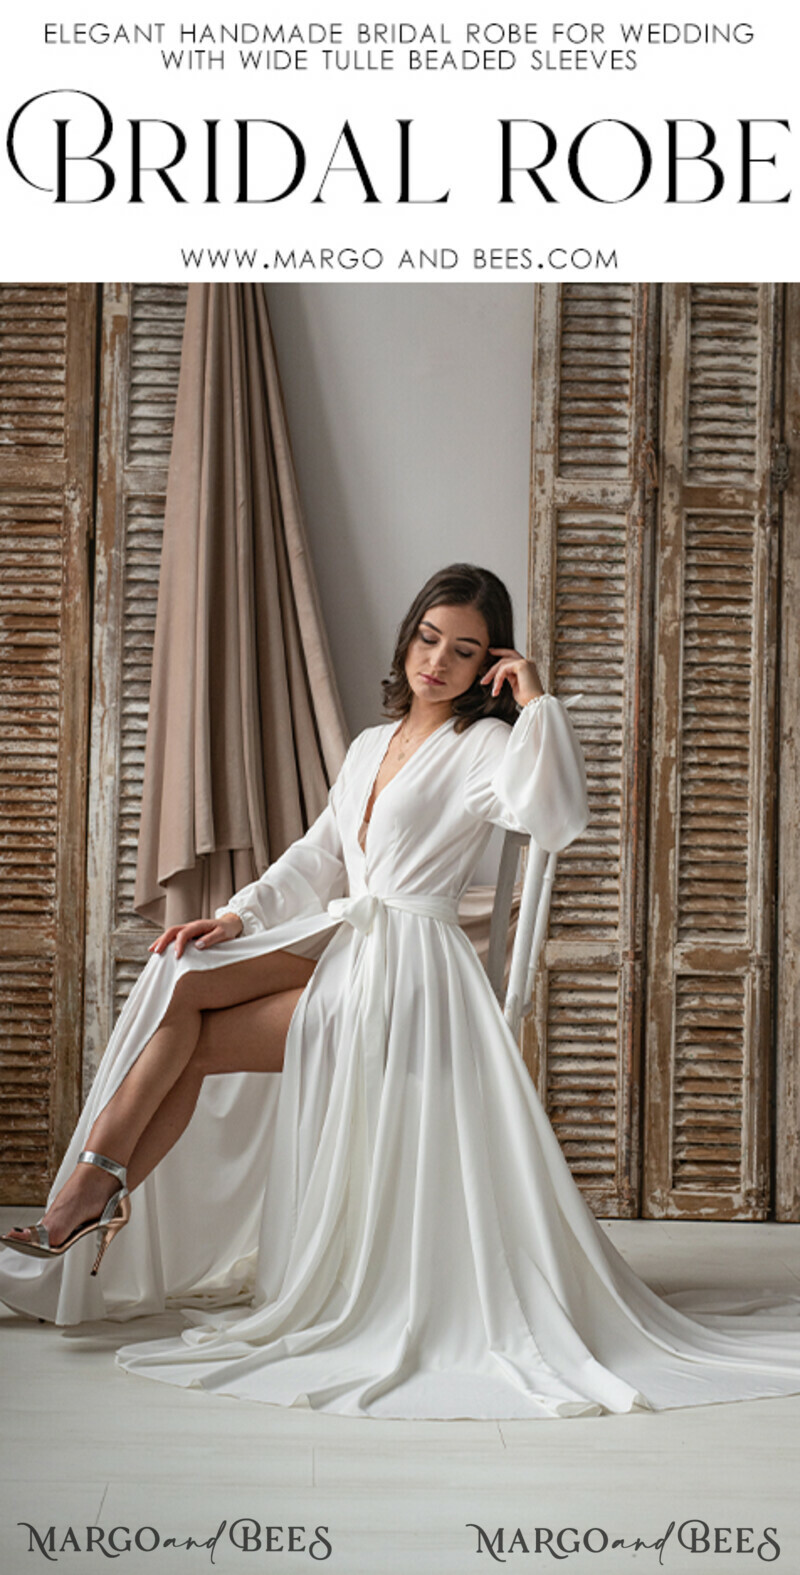 Long Bridal robe for wedding with Train, Robe wide sleeves, Silk Bride robe Long white robe silky boudoir robe Dressing gown Bridesmaid gift-11